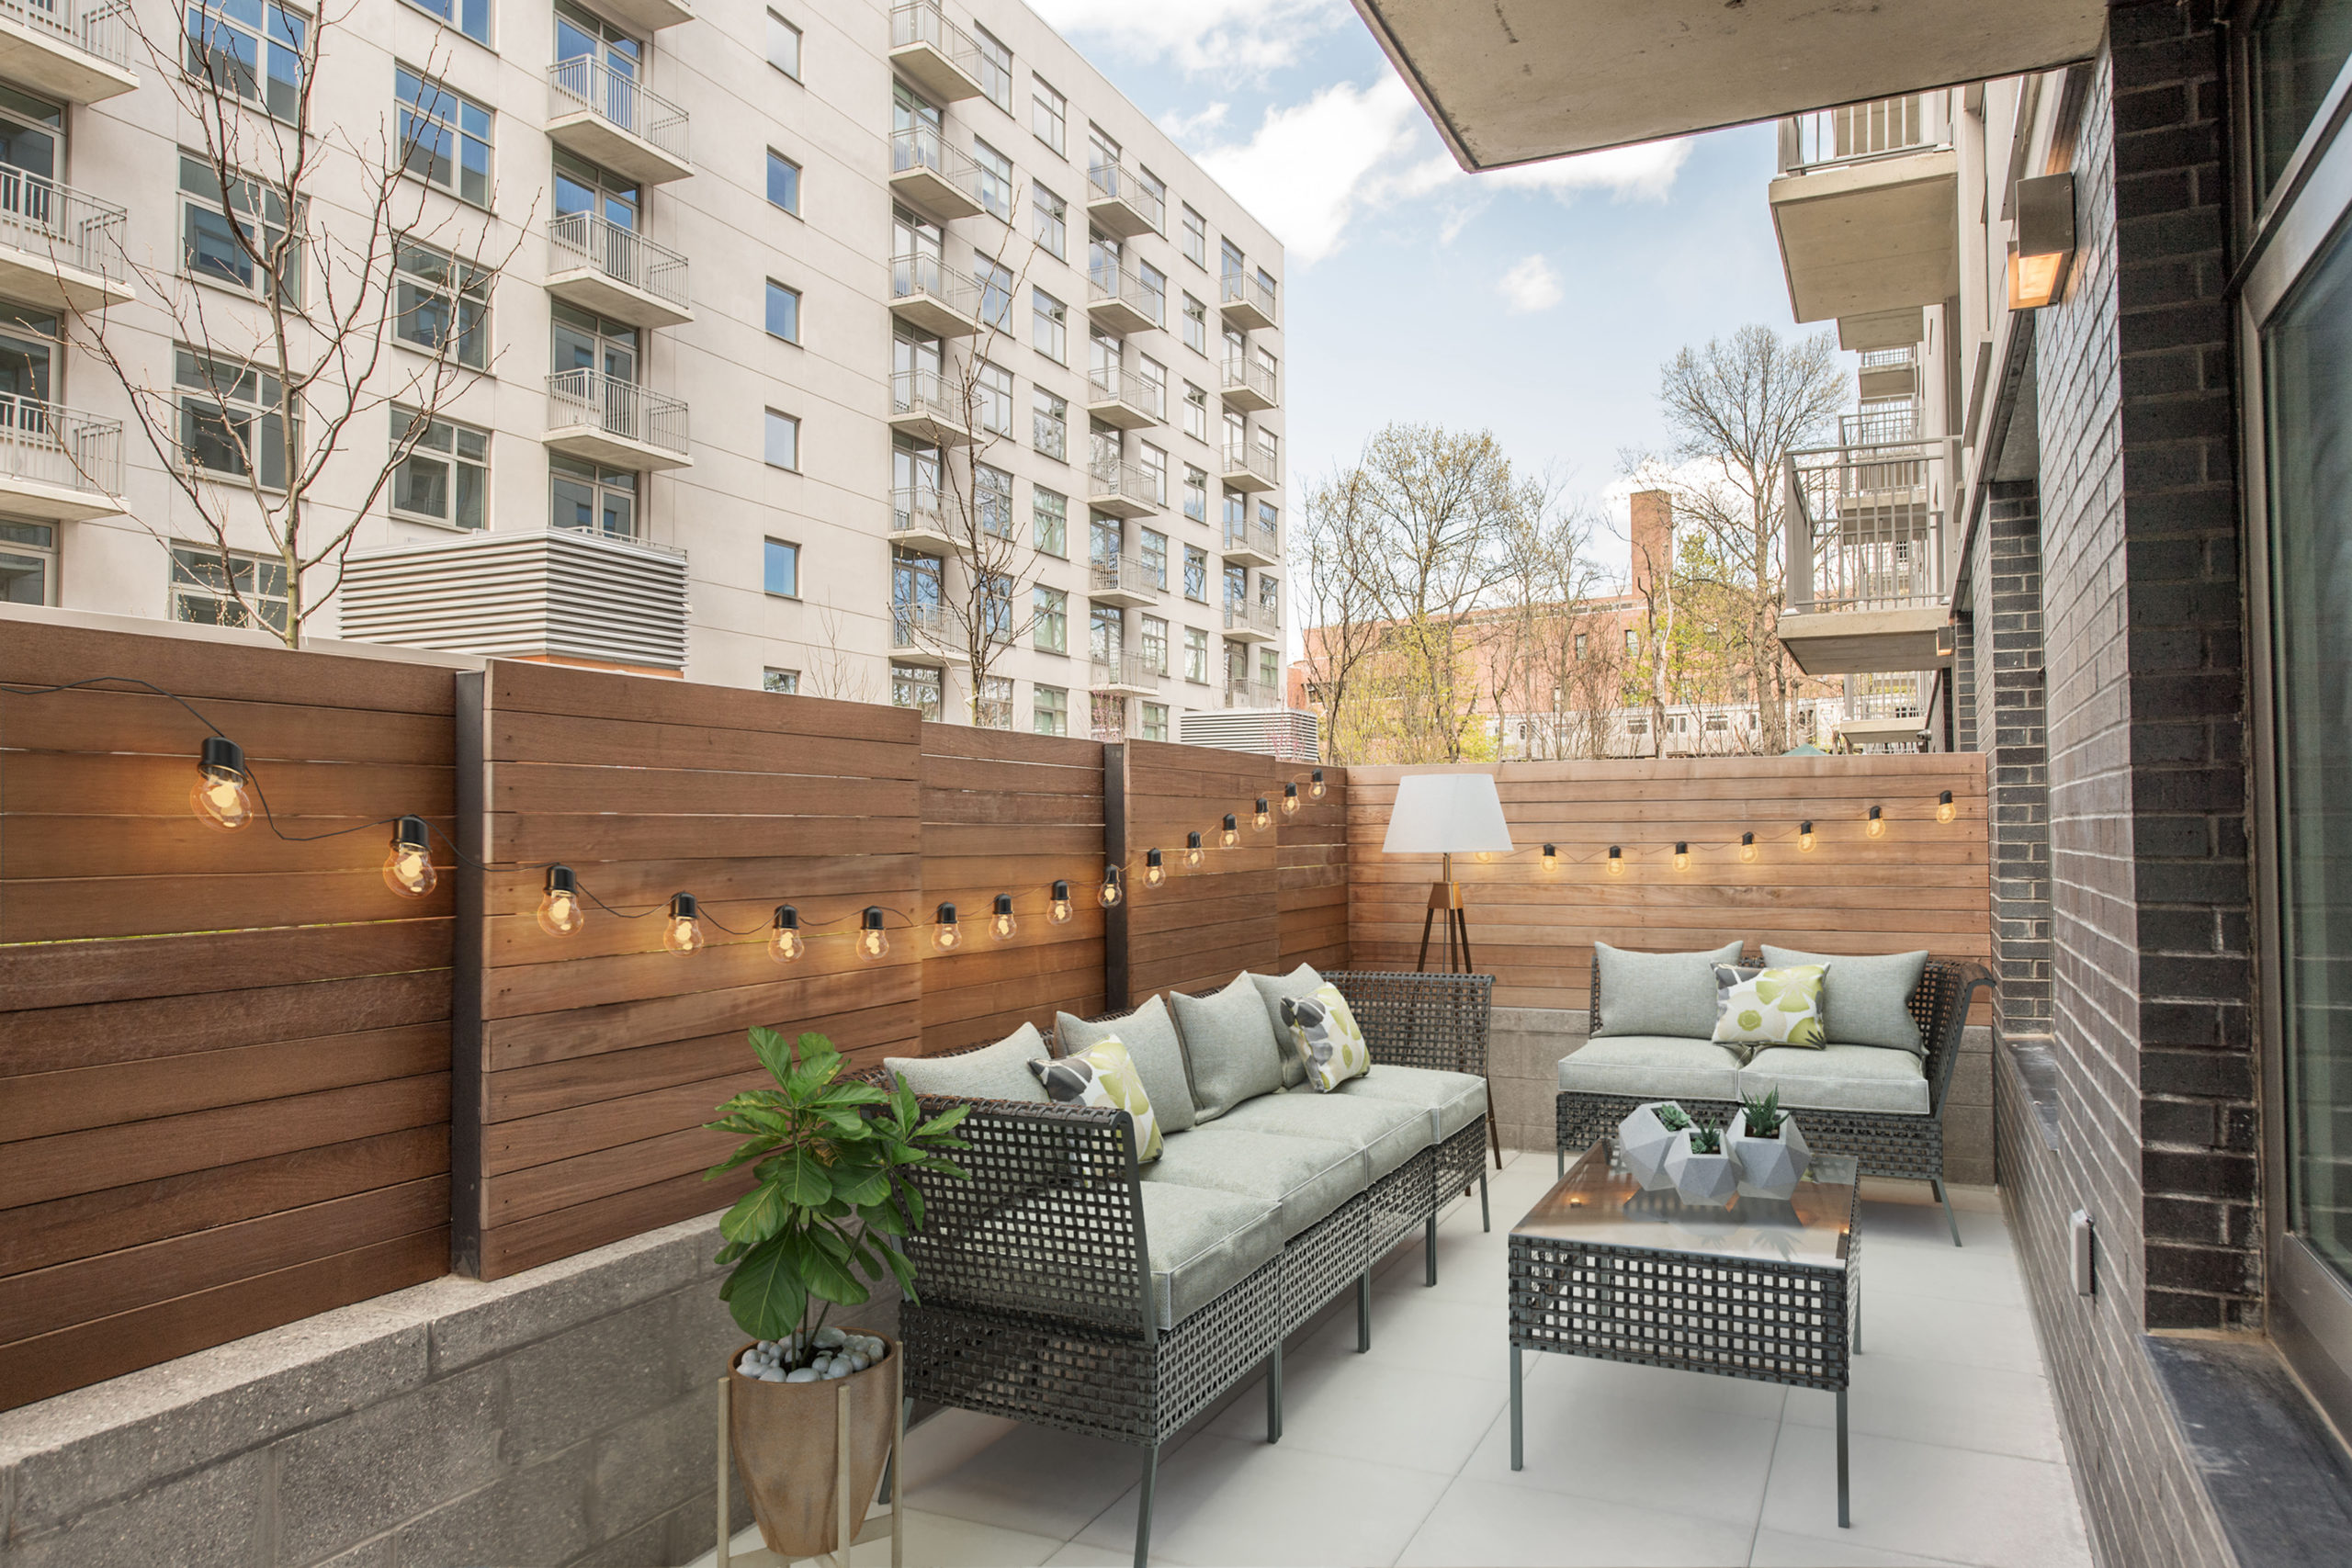 Private outdoor apartment patio at the Vitagraph Brooklyn, NY